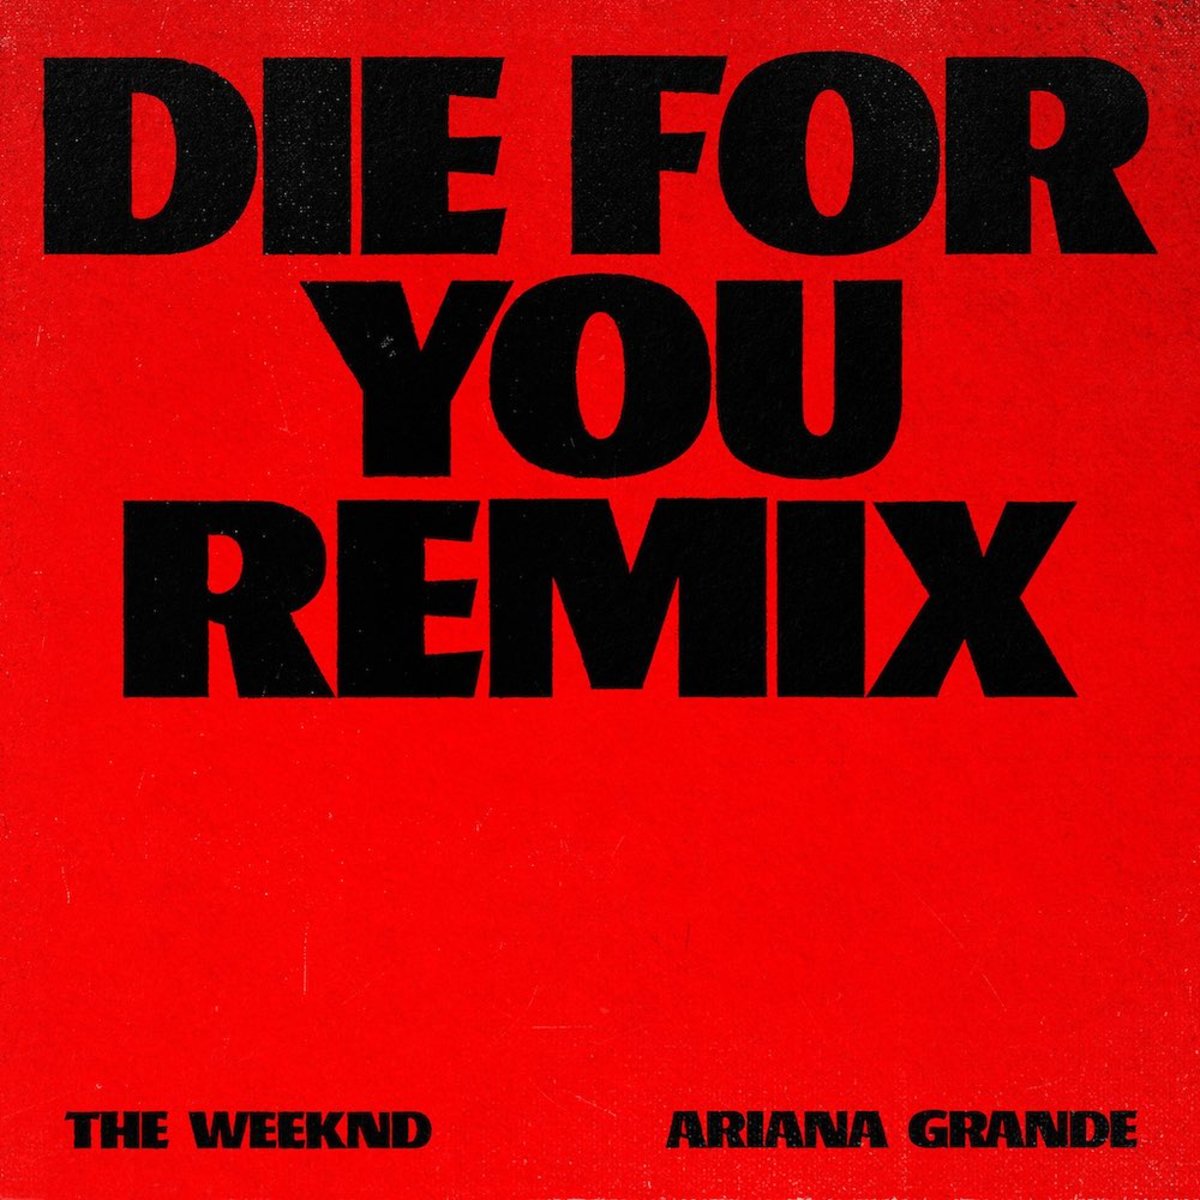 The Weeknd Teams Up With Ariana Grande on “Die for You” Remix | Complex